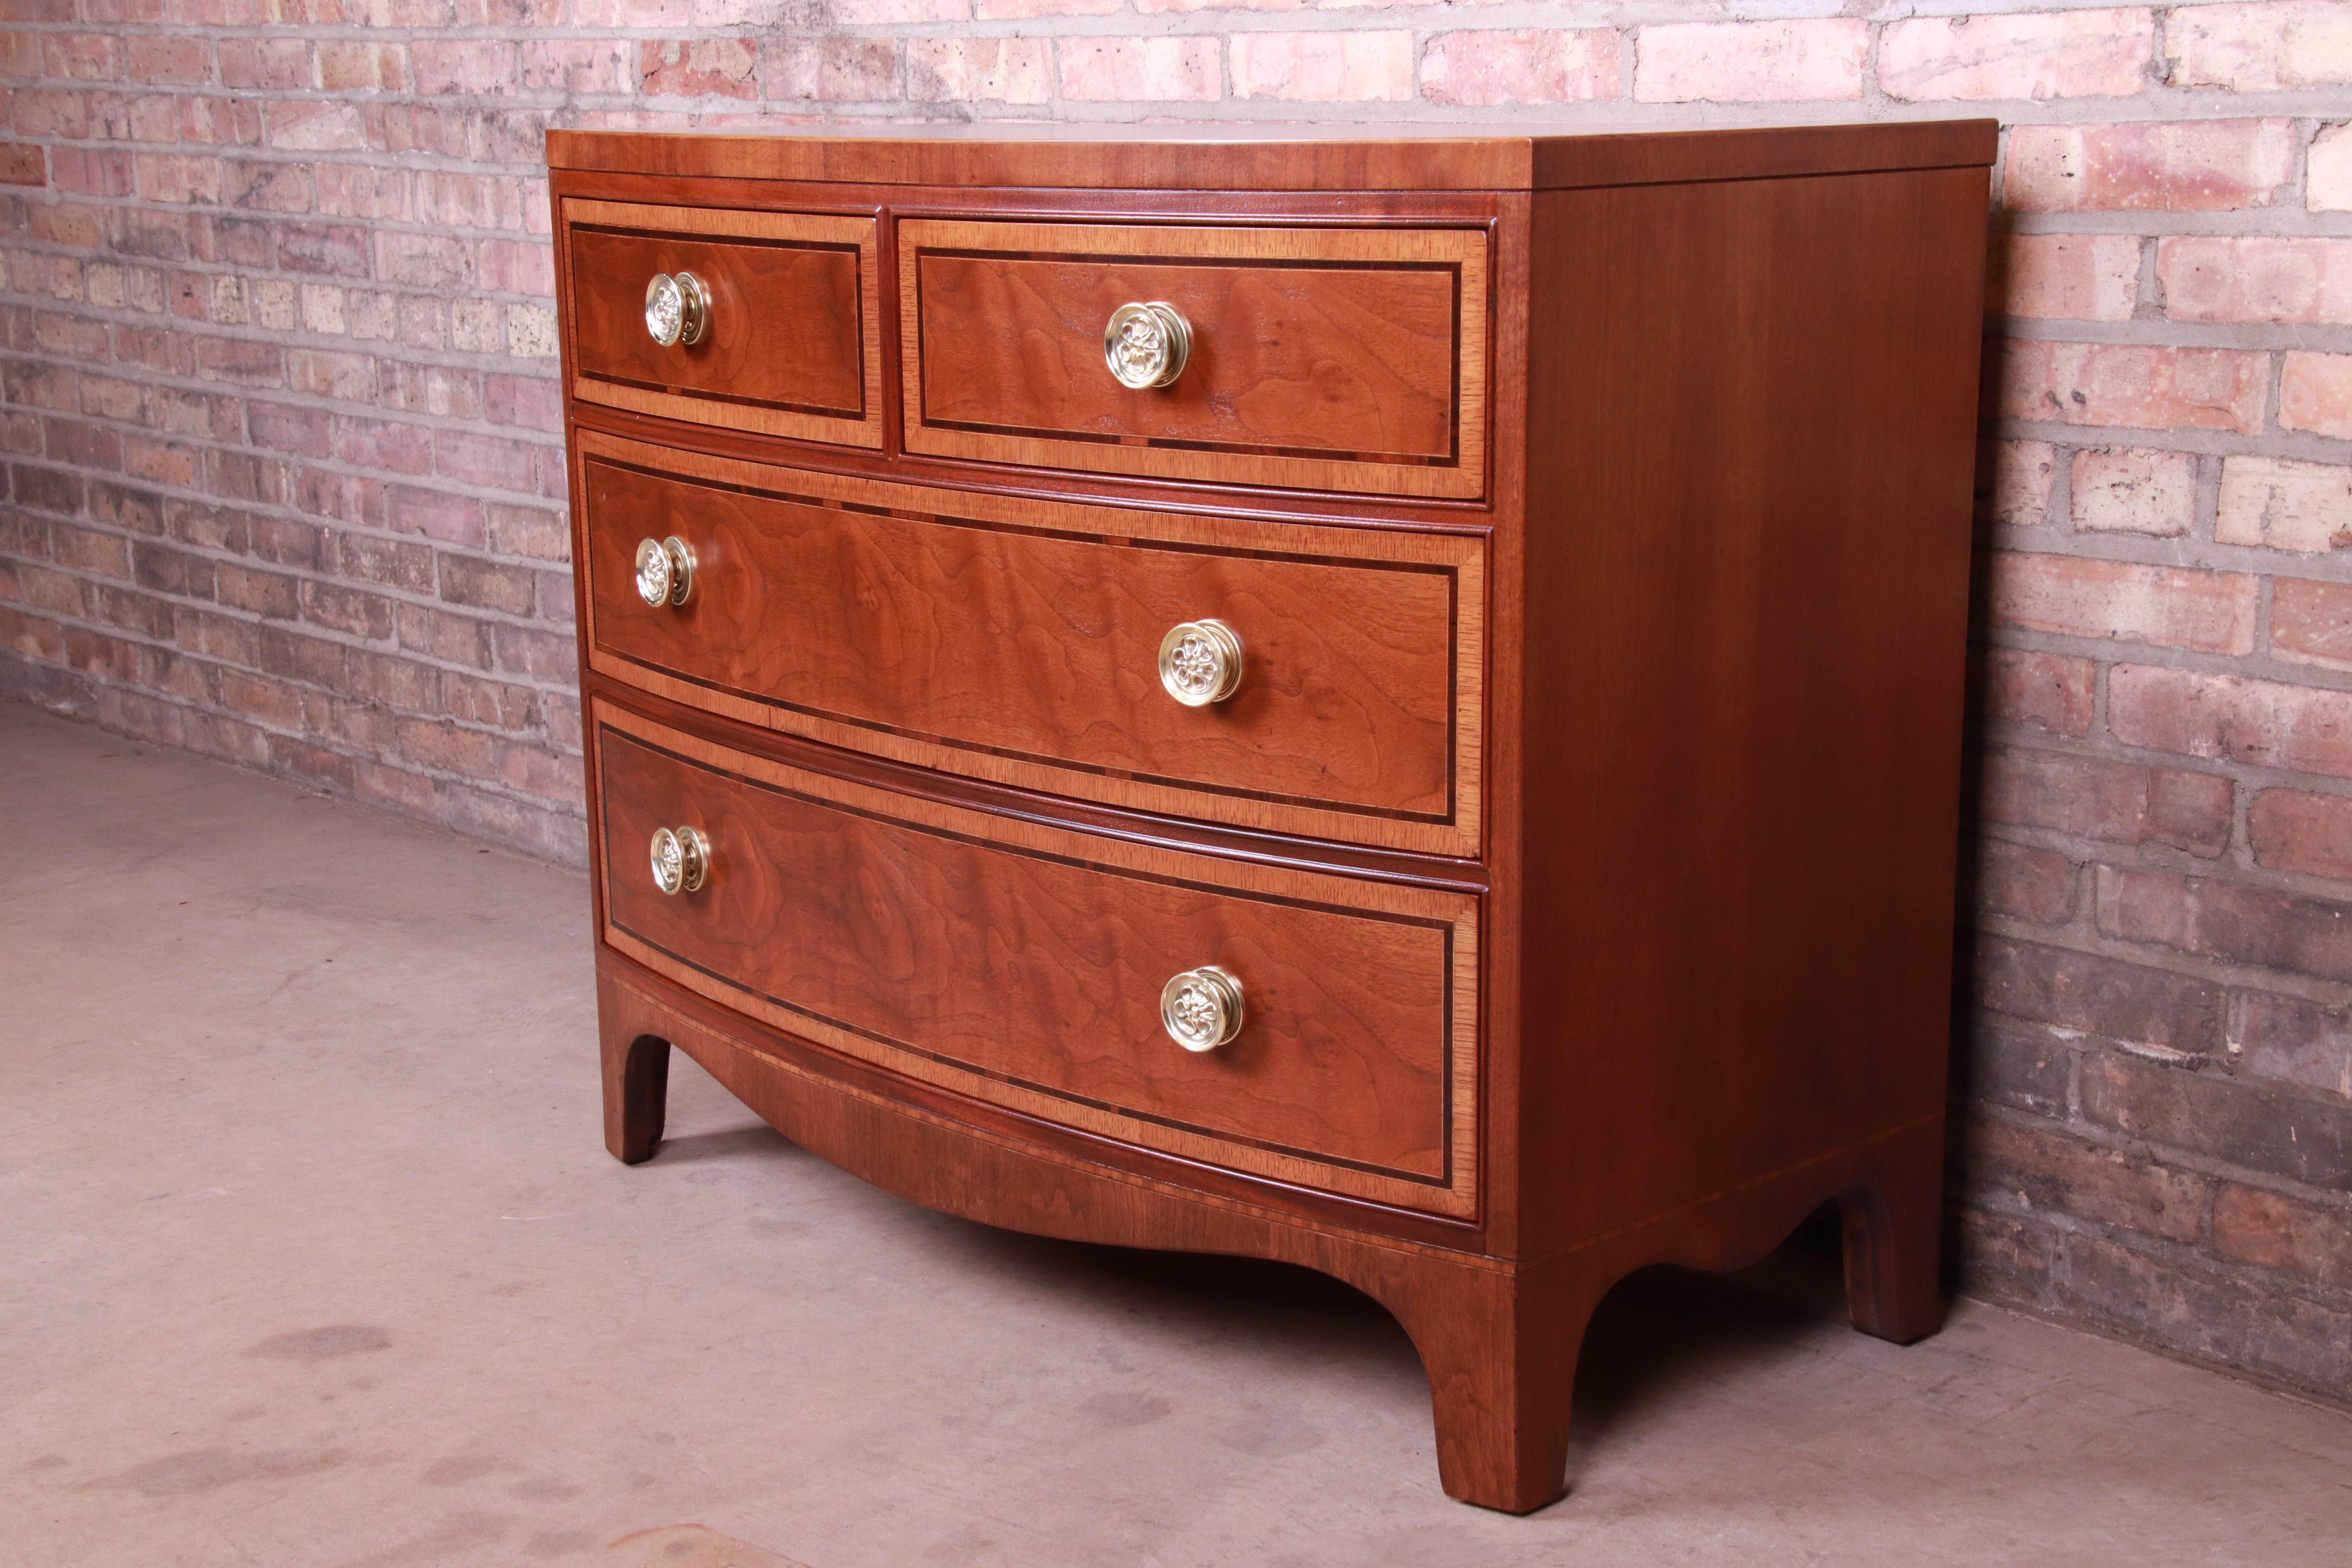 An exceptional Georgian style bow front bachelor chest or commode

By Henredon 